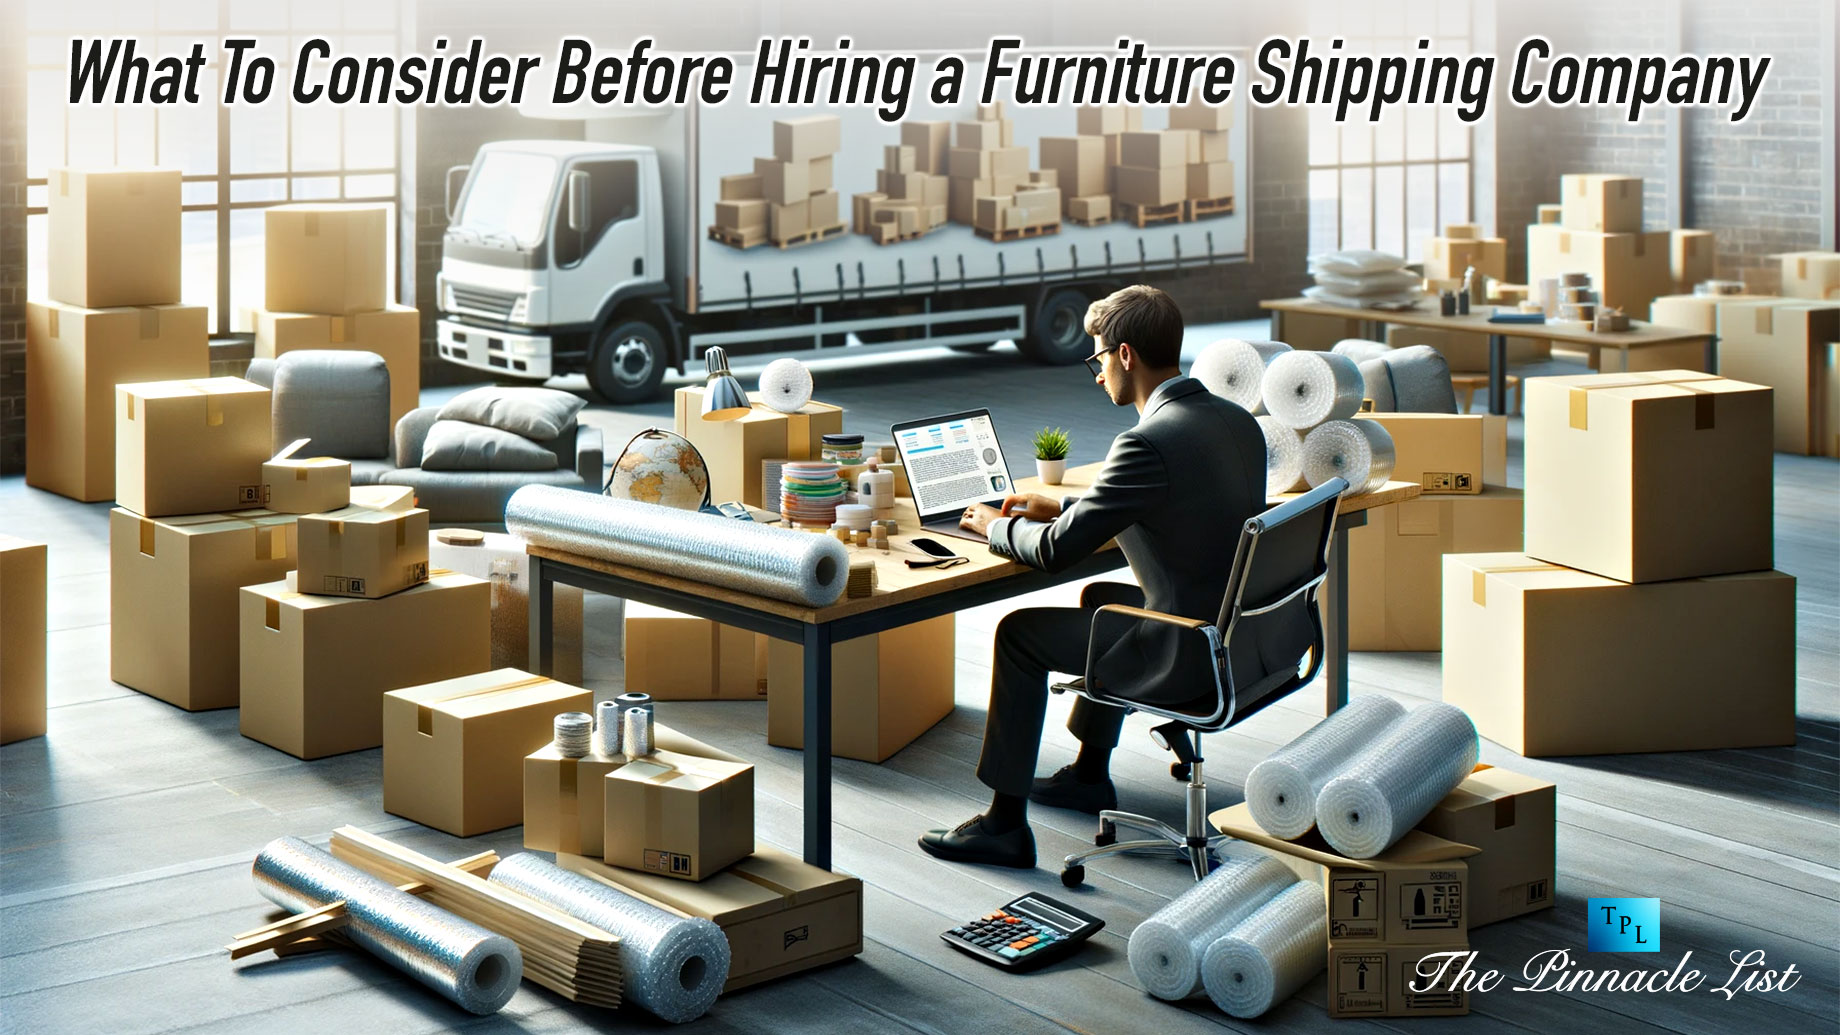 What To Consider Before Hiring a Furniture Shipping Company